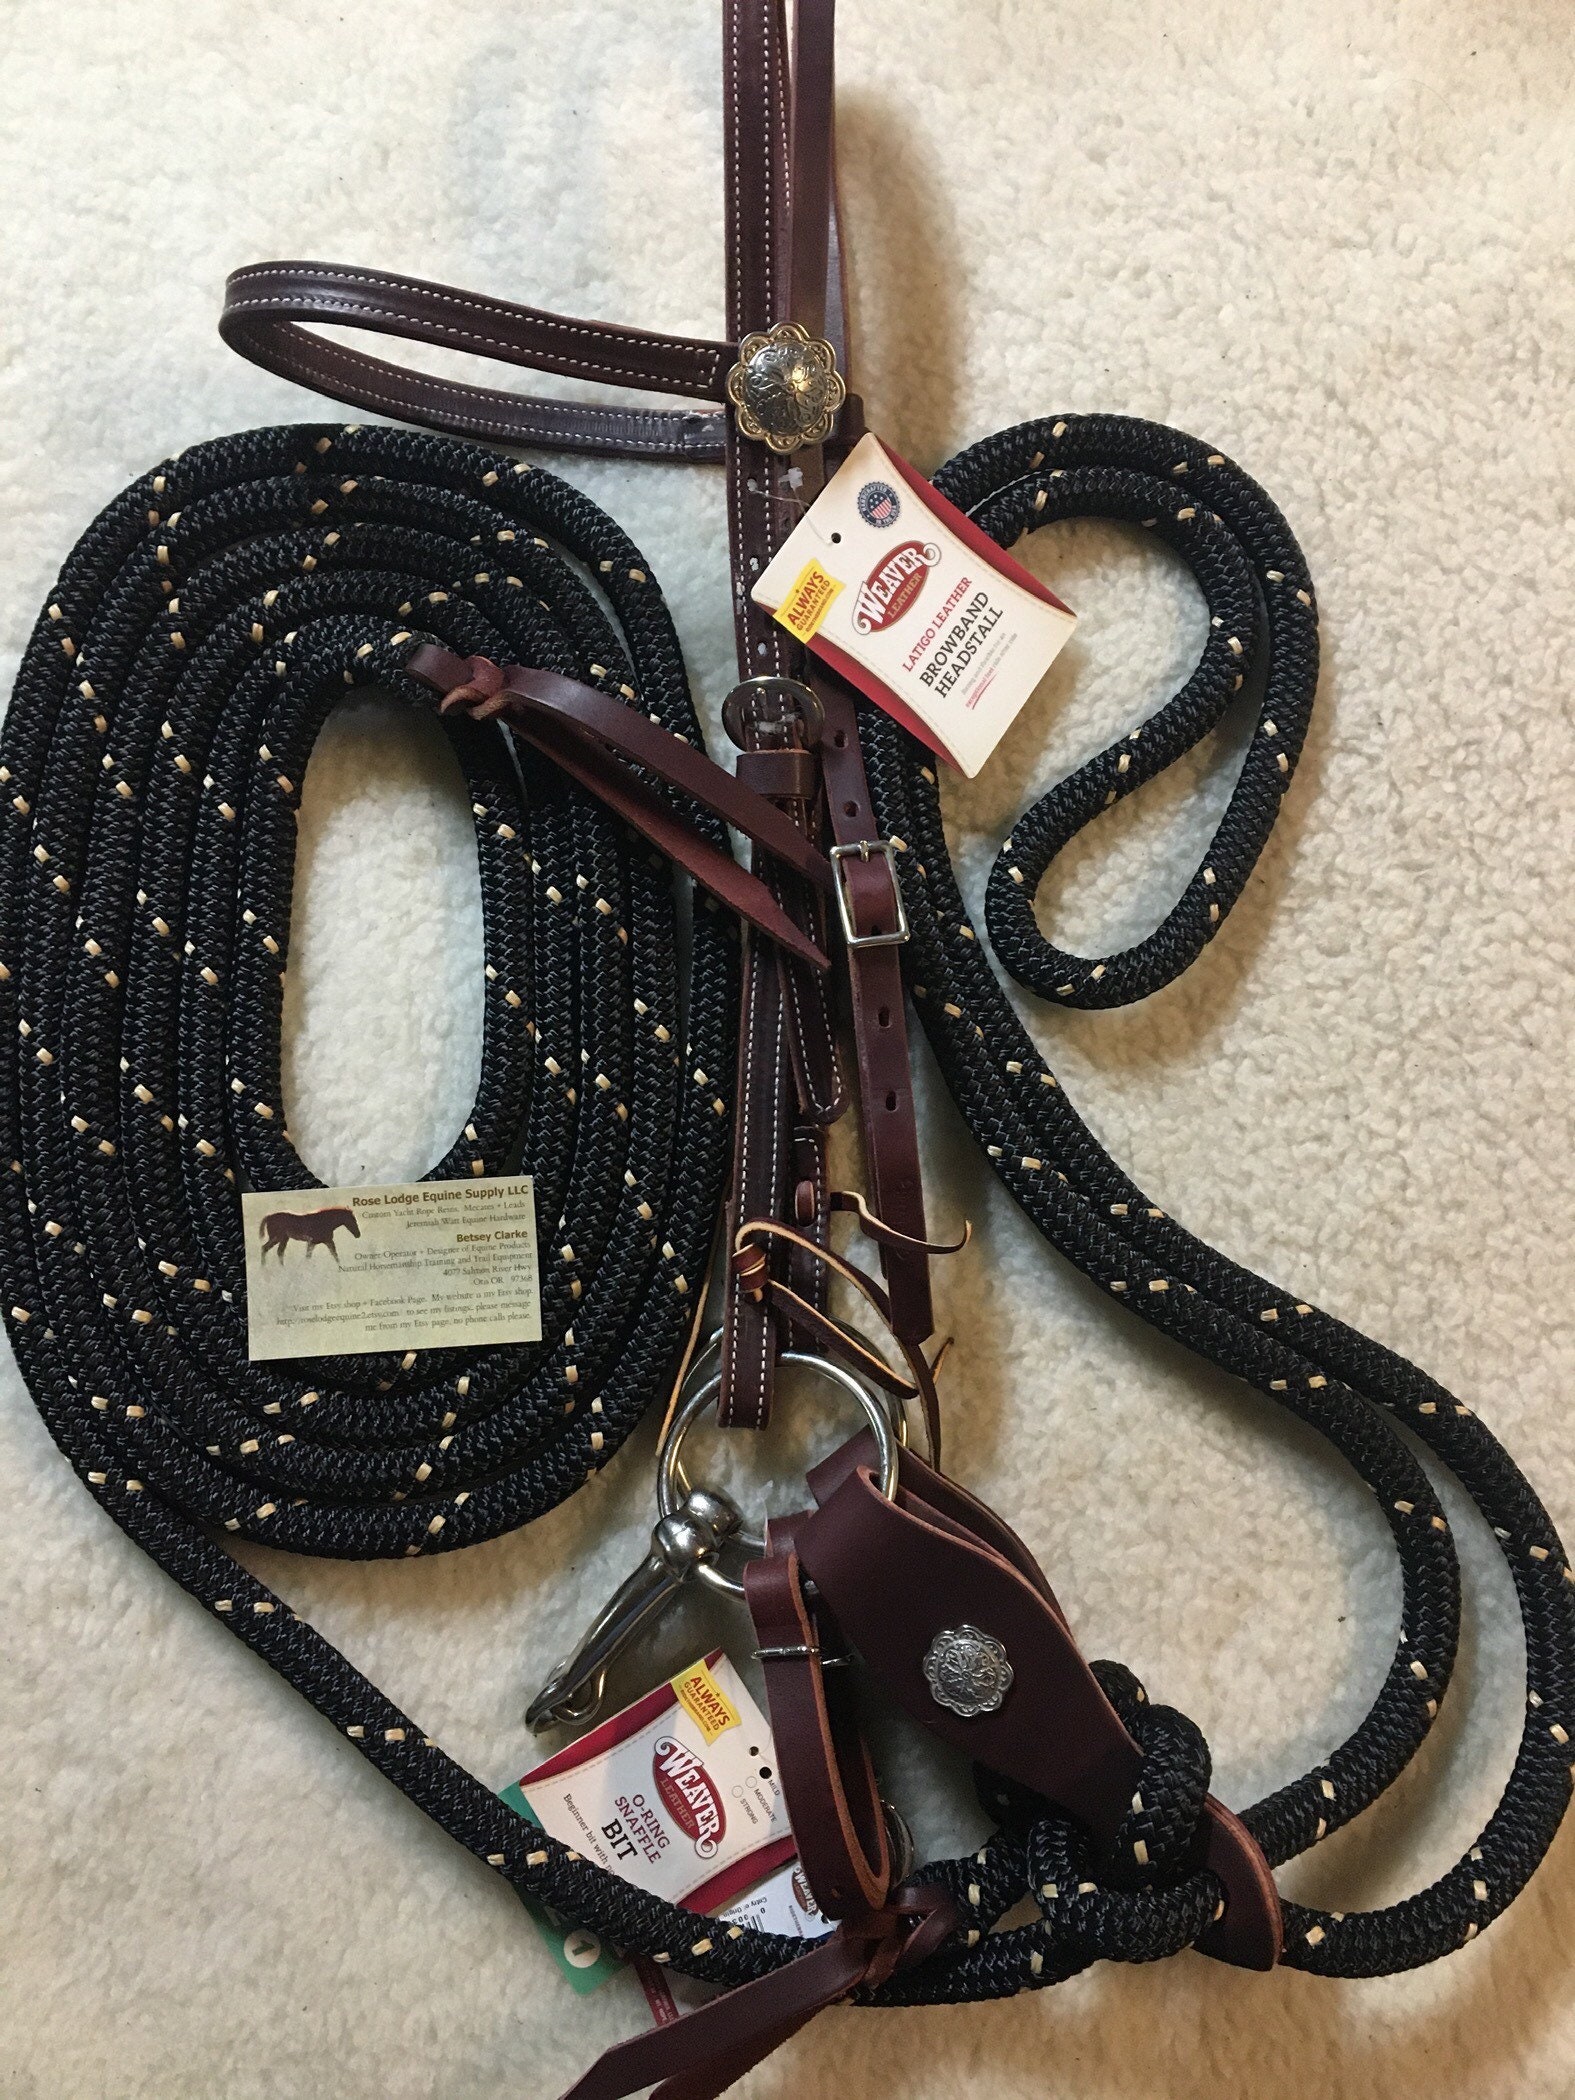 Weaver Leather Browband Bridle with Single Cheek Buckle